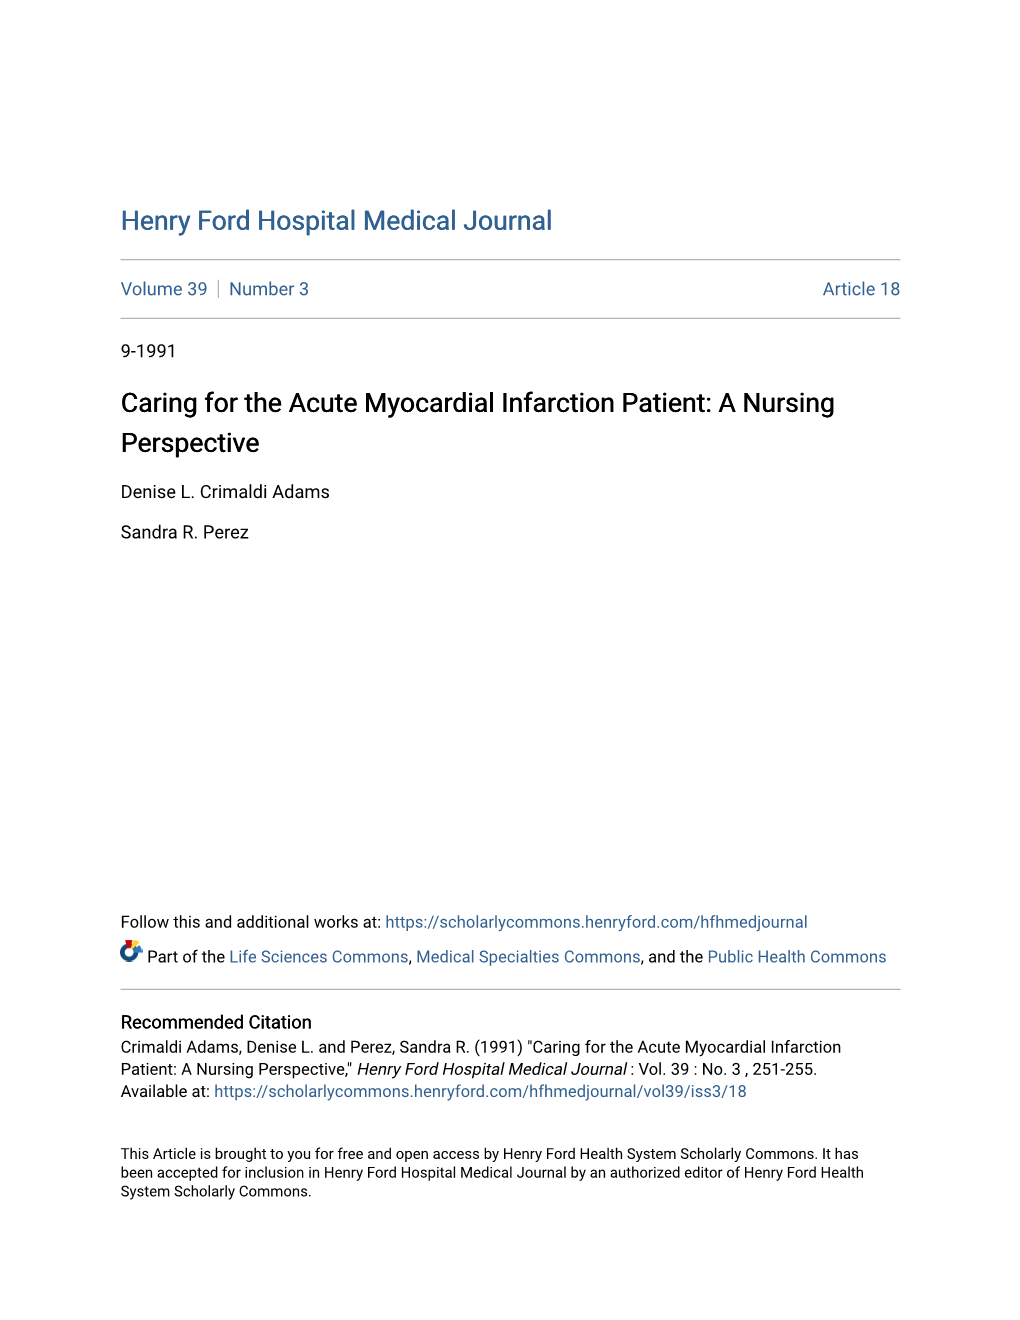 Caring for the Acute Myocardial Infarction Patient: a Nursing Perspective